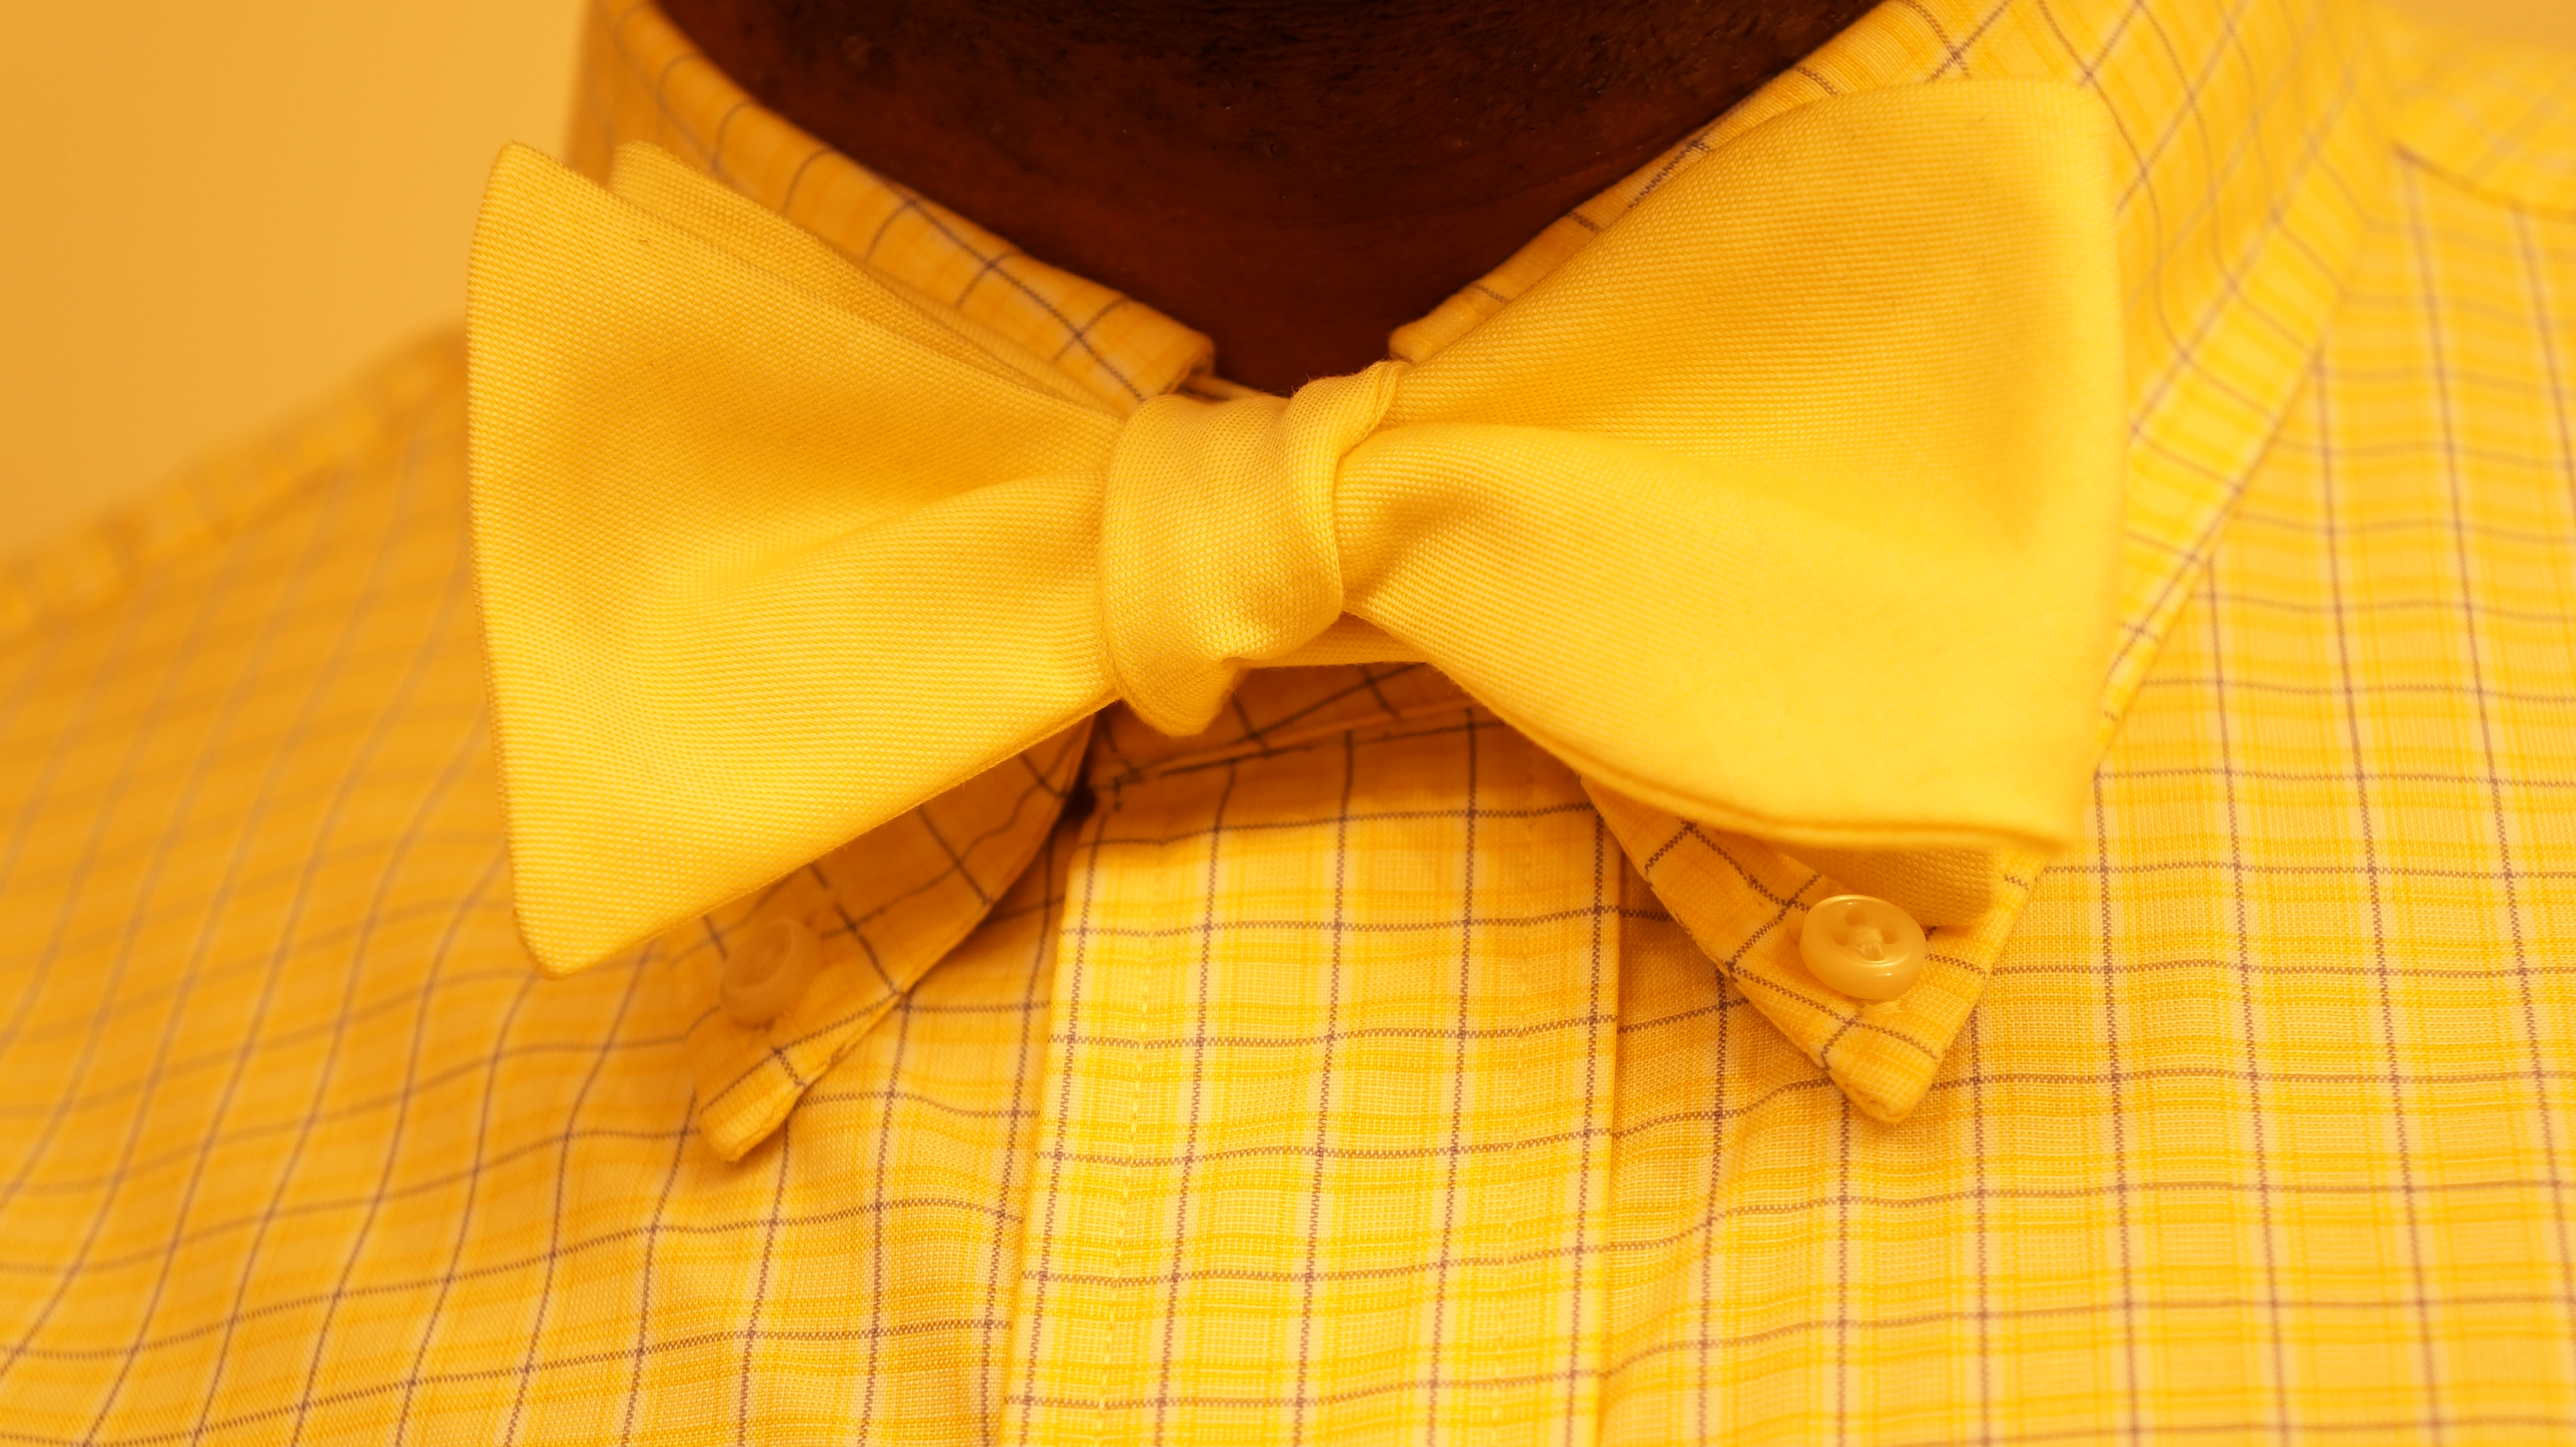 Headline for The Bow Tie Naming Rights Contest (Charity Water Yellow)